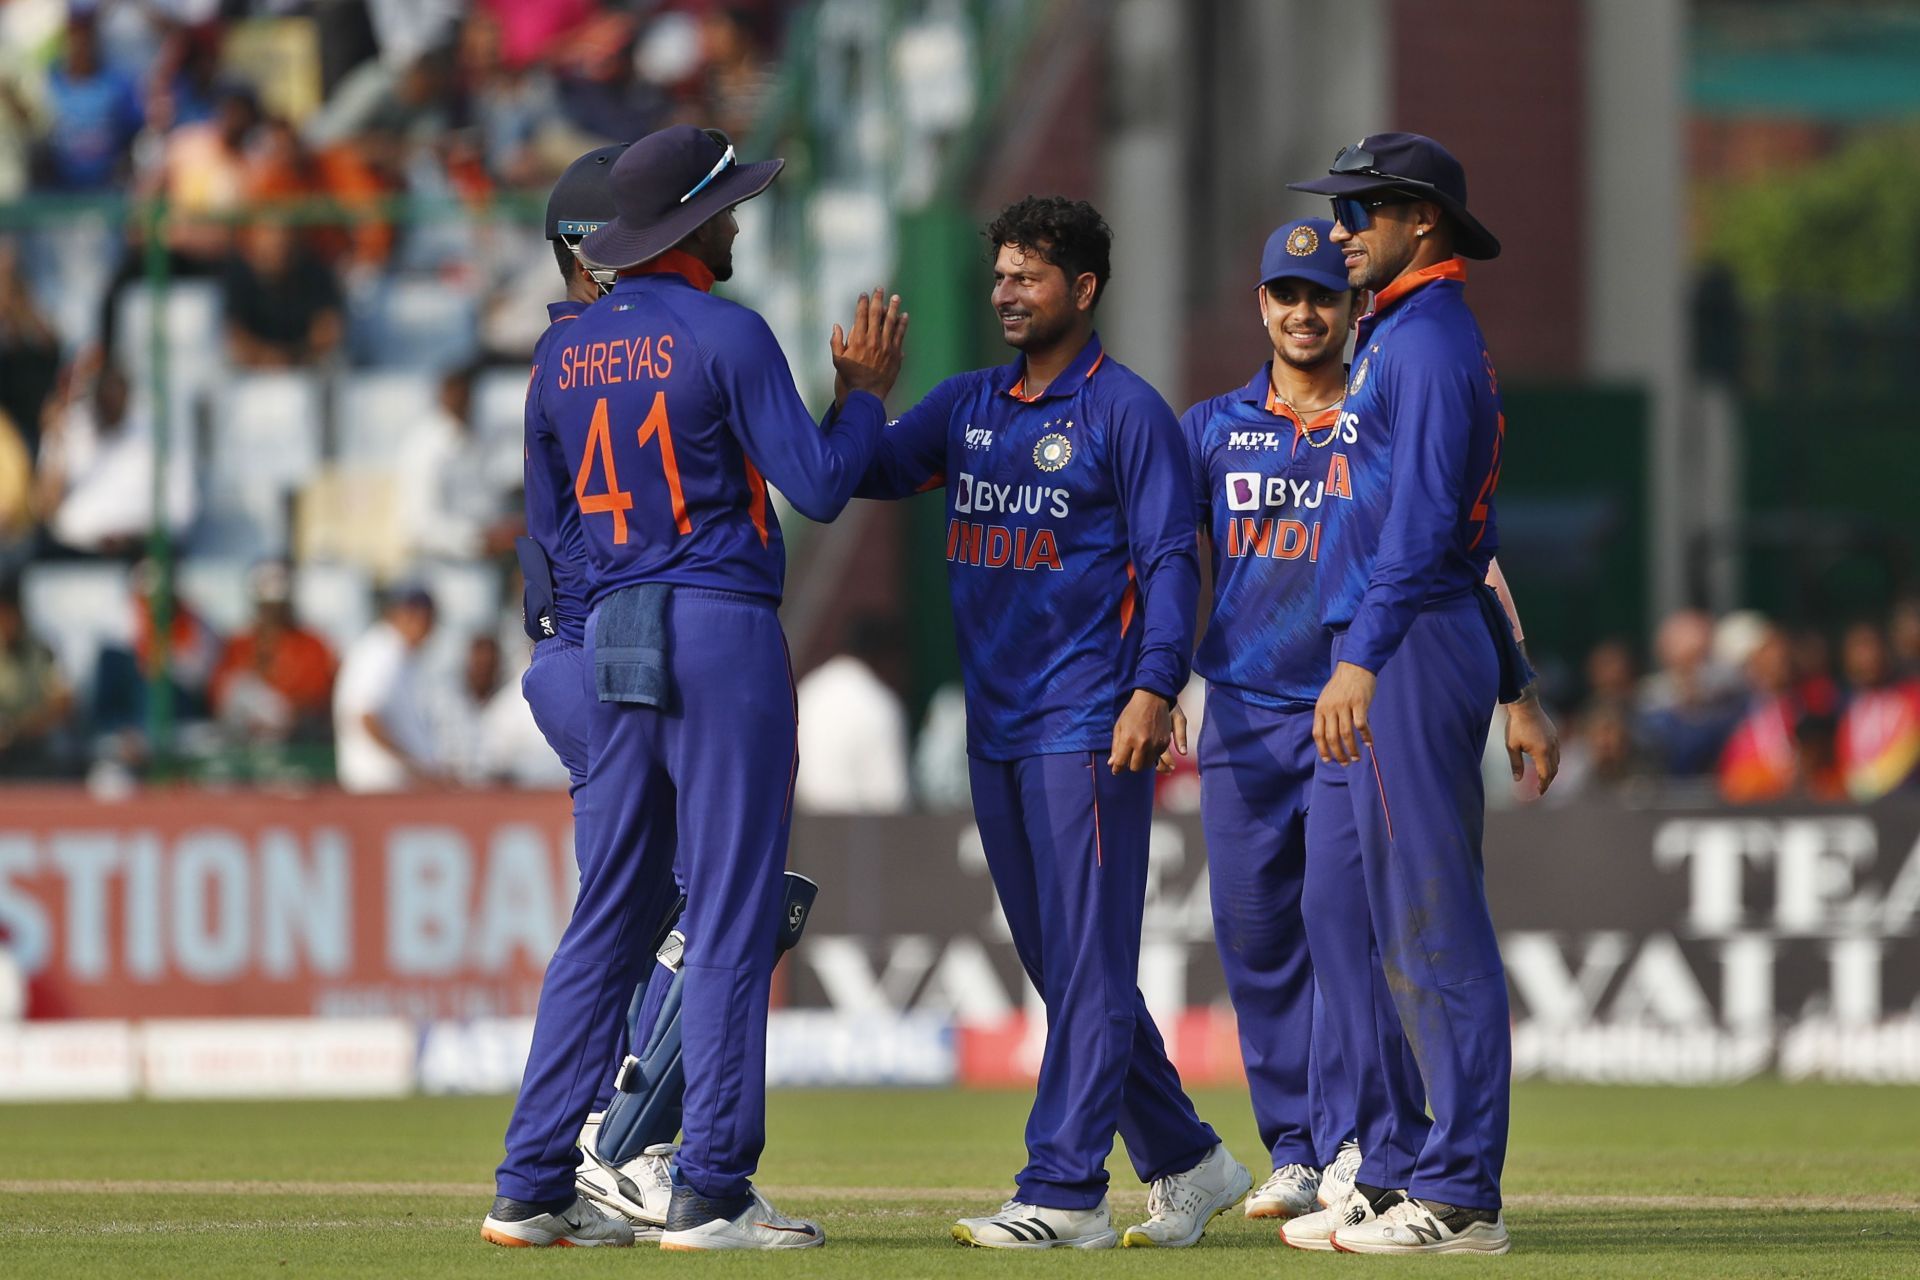 The left-arm spinner celebrates a wicket with his teammates. Pic: Getty Images